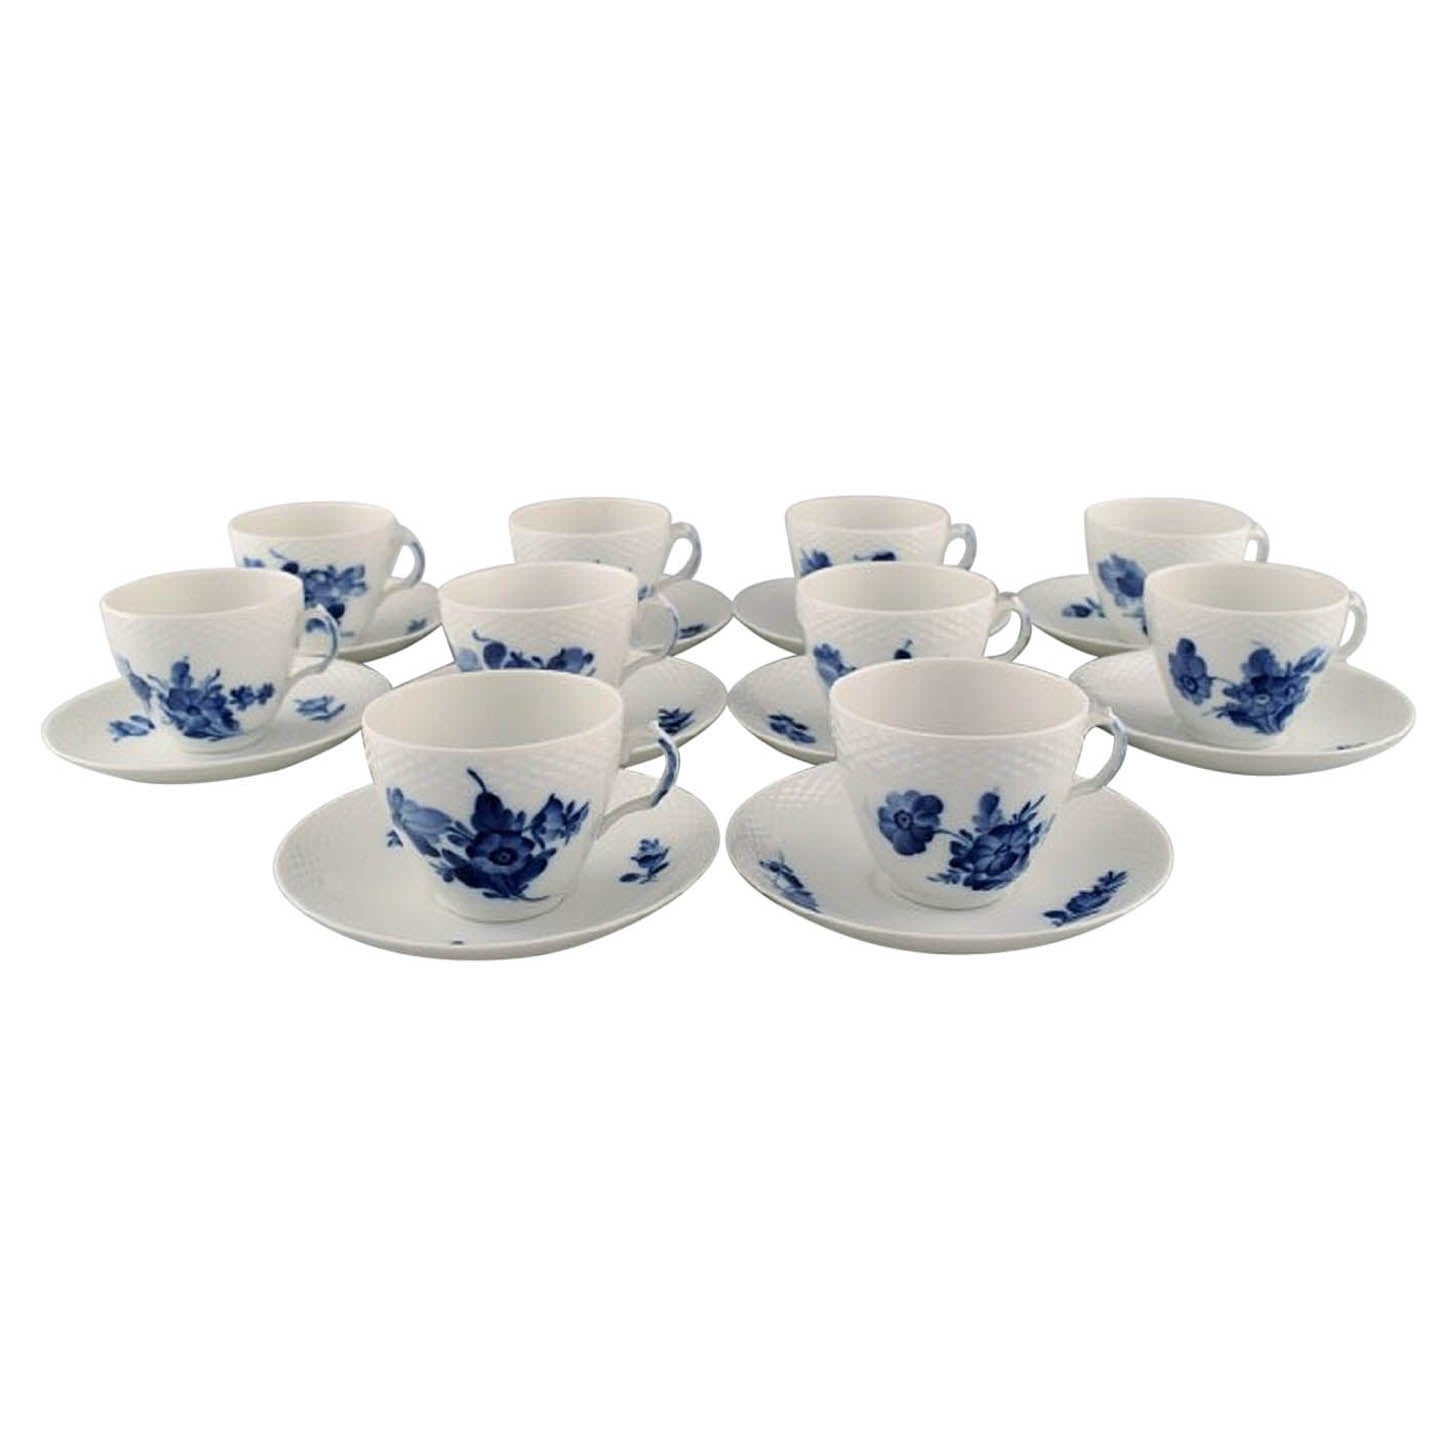 10 Royal Copenhagen Blue Flower Braided Coffee Cups with Saucers, 1960s